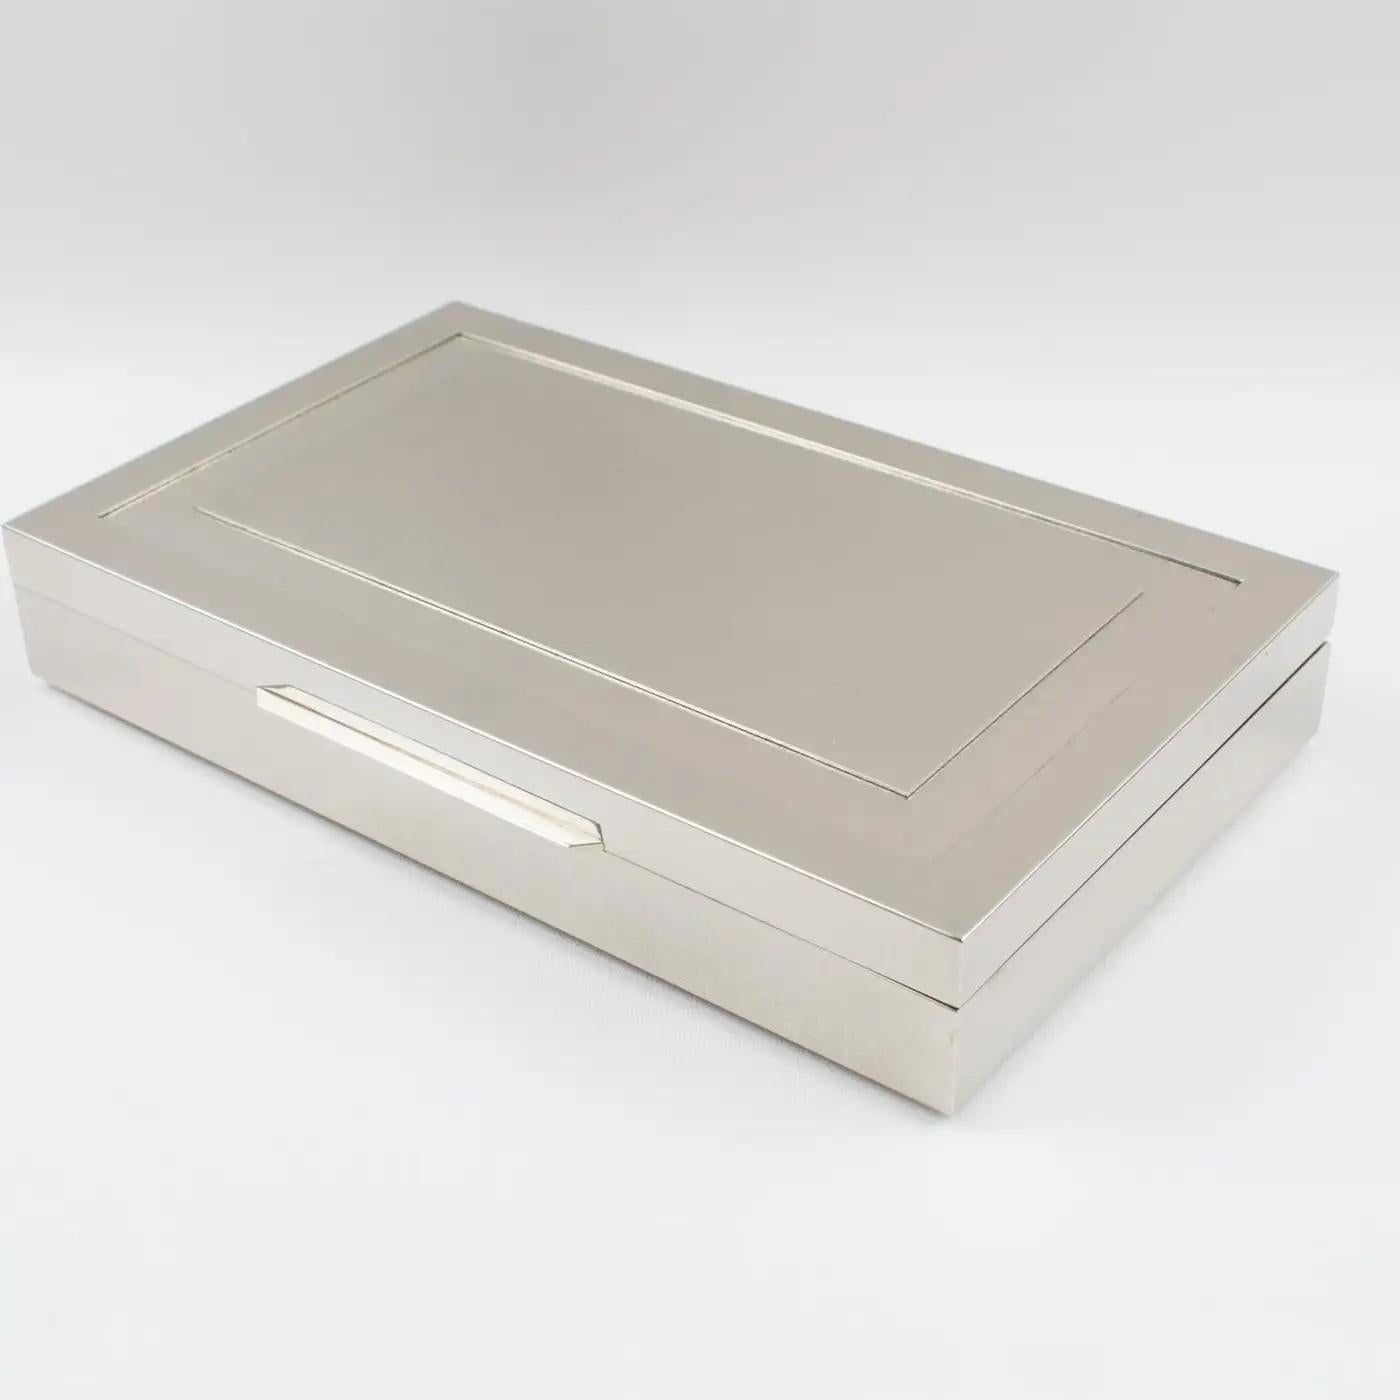 This exquisite modernist decorative covered box was designed by Giacomo Sinopoli and crafted by Liwan's Rome in the 1970s. The box features a large rectangular shape in chromed metal with a satin finish aspect and a geometric design on the lid. The